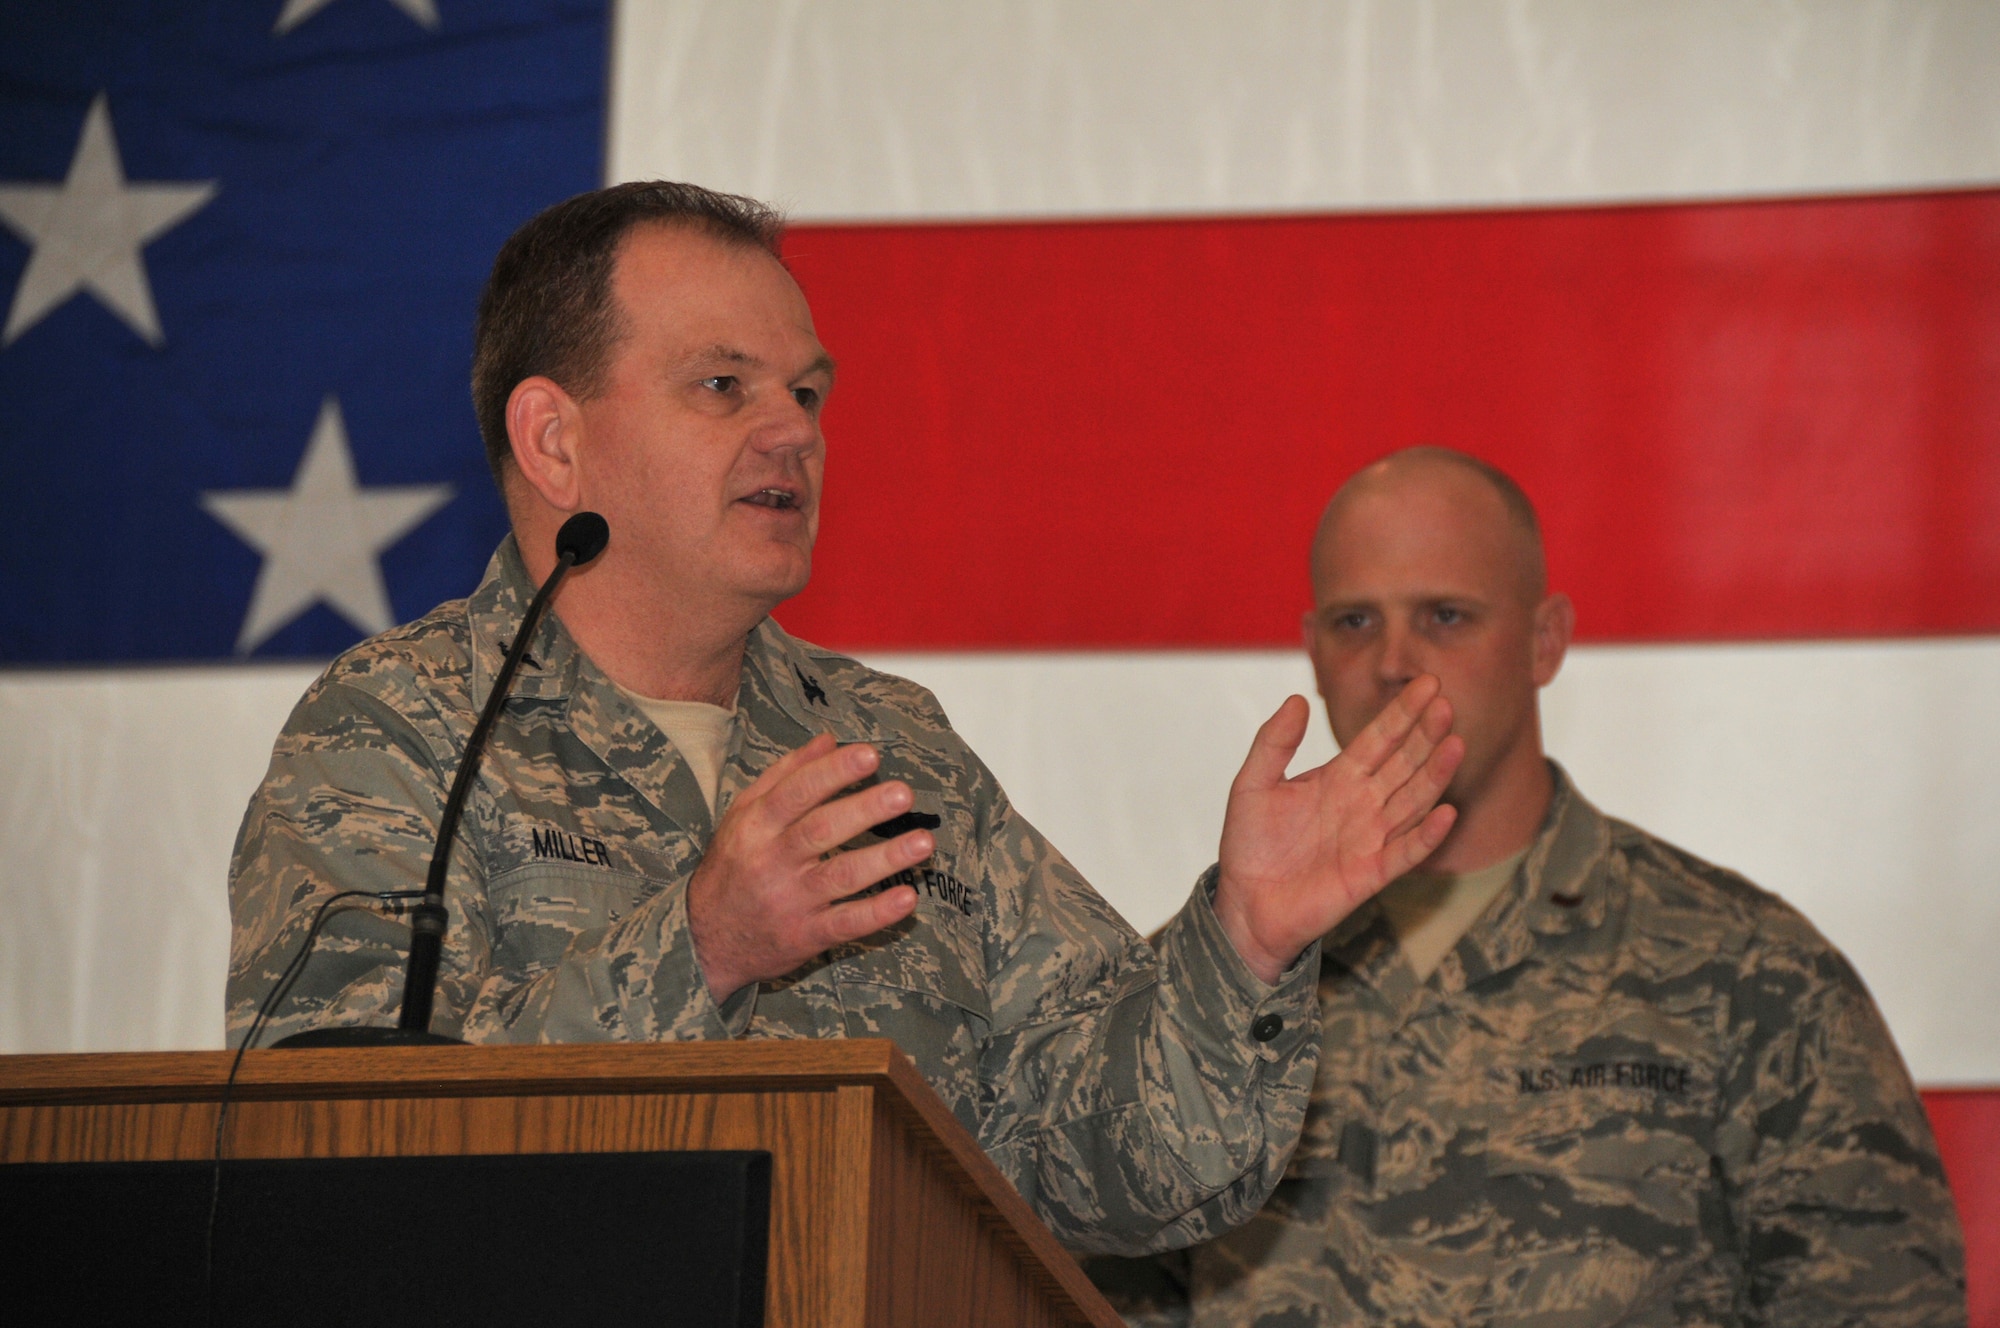 Col. Brian Miller, commander of the 185th Air Refueling Wing, welcomes home members of the 185th Air Refueling Wing from various deployments by Wing Commander on 3 March, 2012 in Sioux City, Iowa. During 2011, over 300 airmen from the 185th have deployed to Iraq, Afghanistan, and numerous other locations around the globe in support of the Department of Defense contingency operations.   (US Air Force Photo by TSgt Brian Cox)